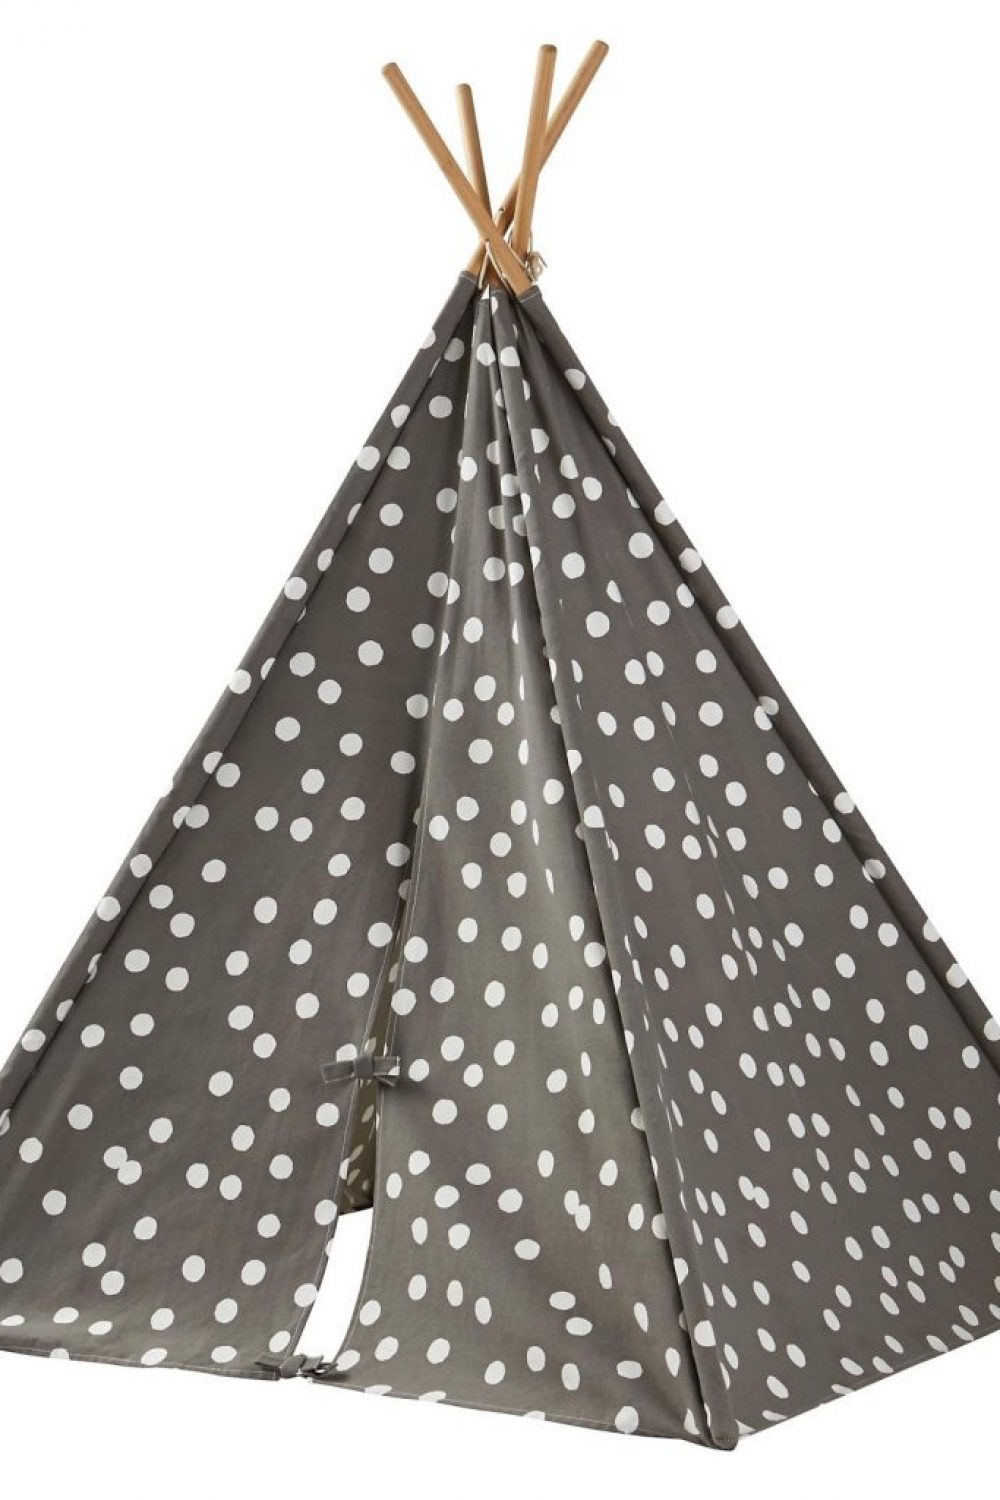 Polka-dot teepee giveaway from The Land of Nod